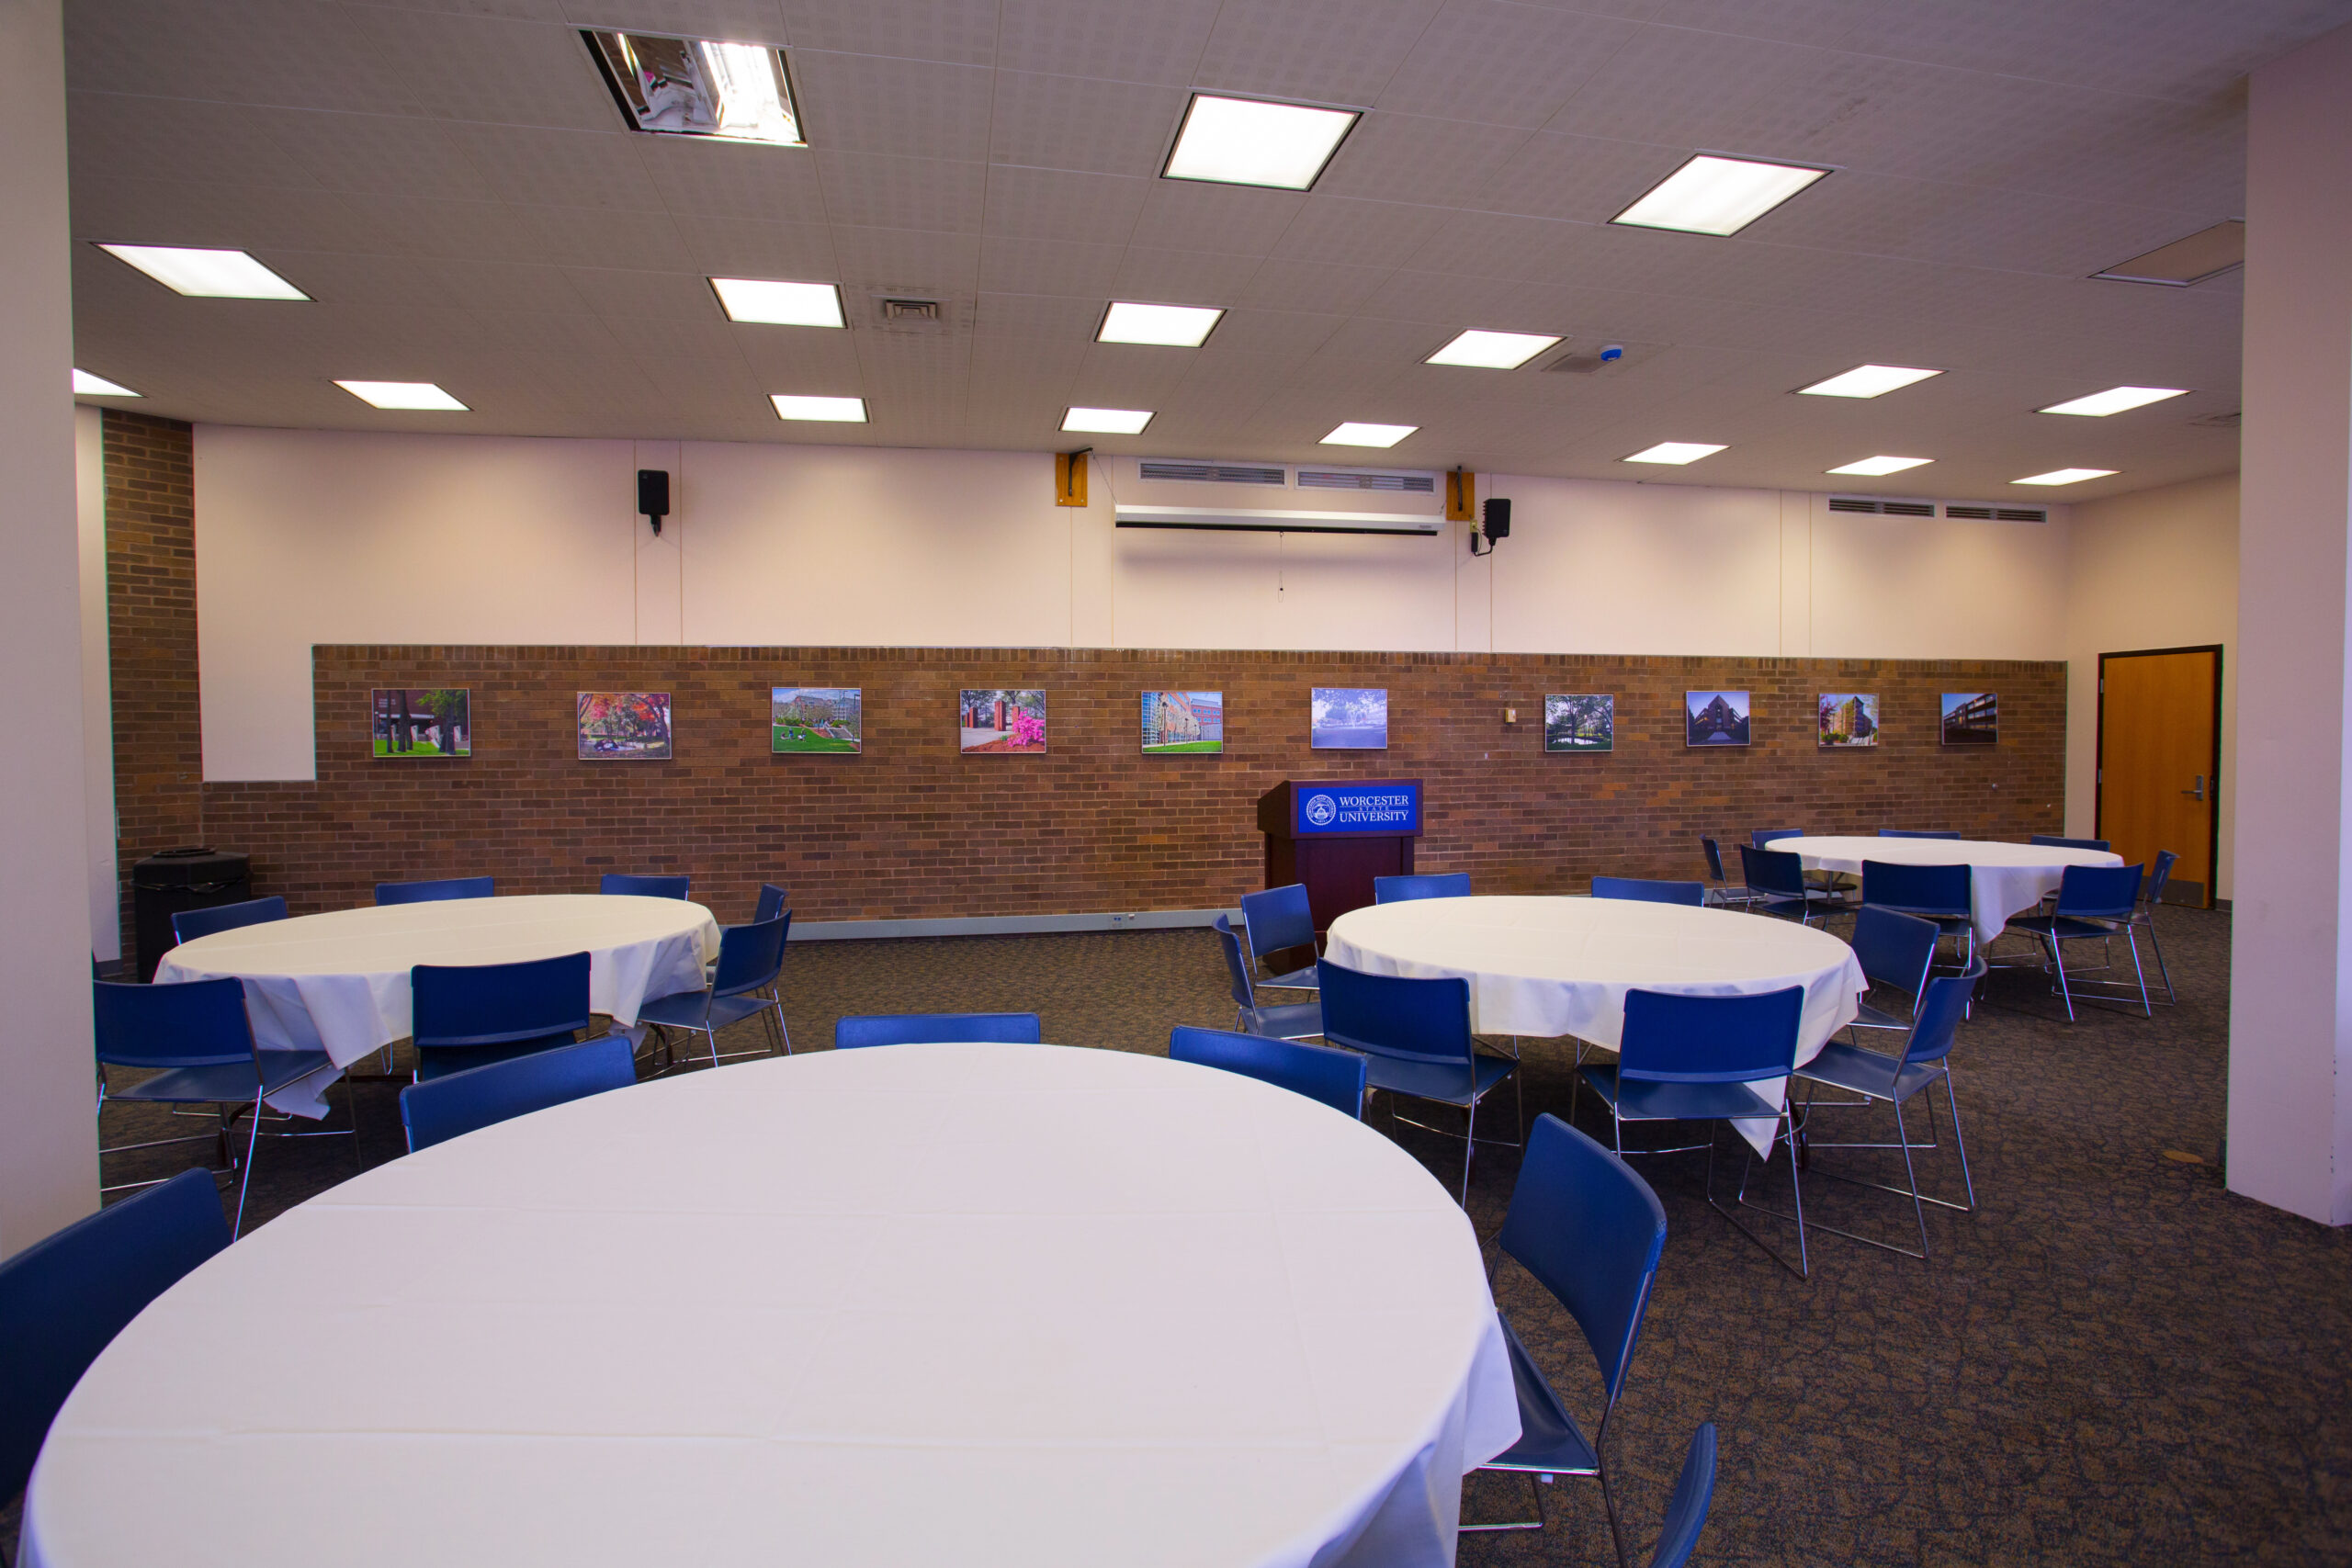 An events room with 4 tables set up with blue chairs and a podium